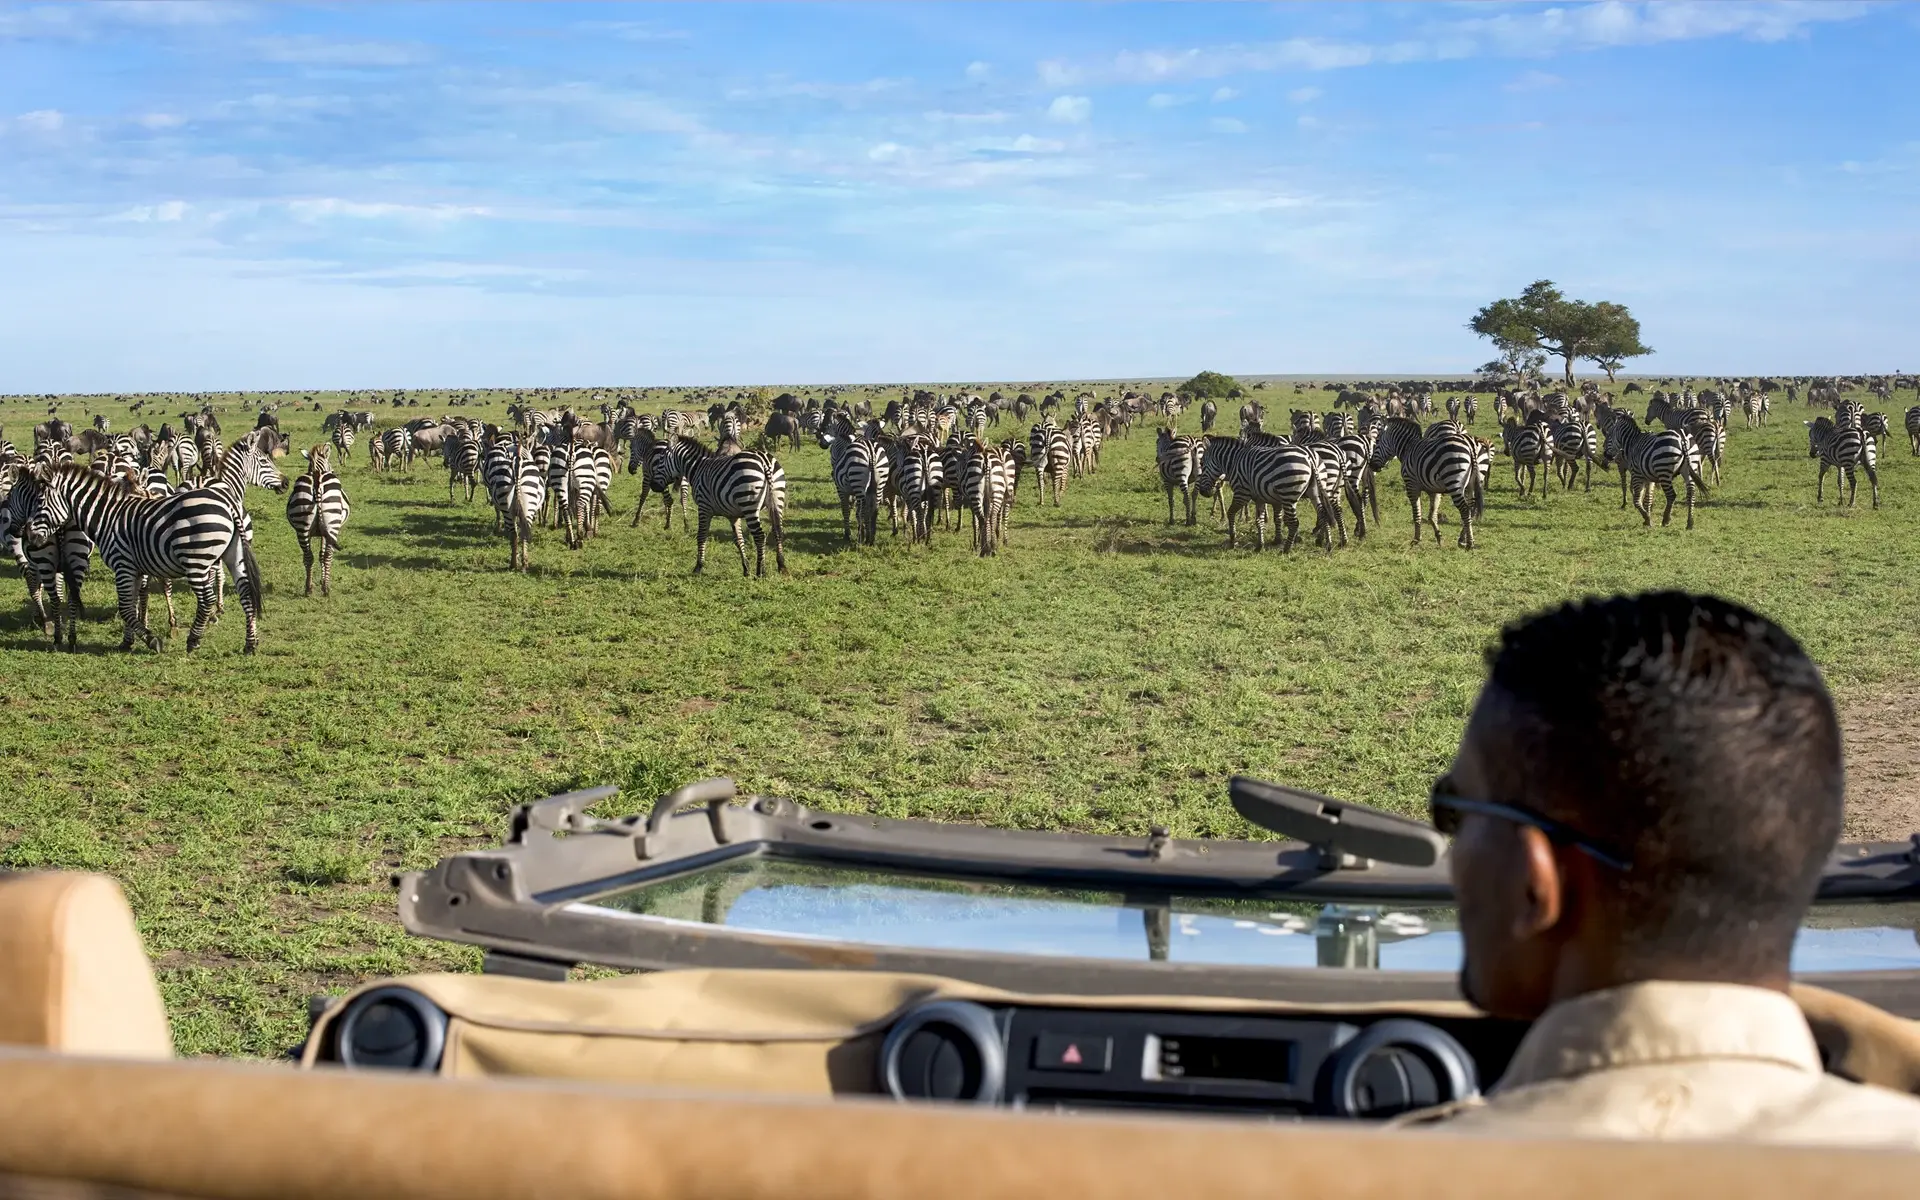 Expert guide and open vehicle at the Great Migration in Africa